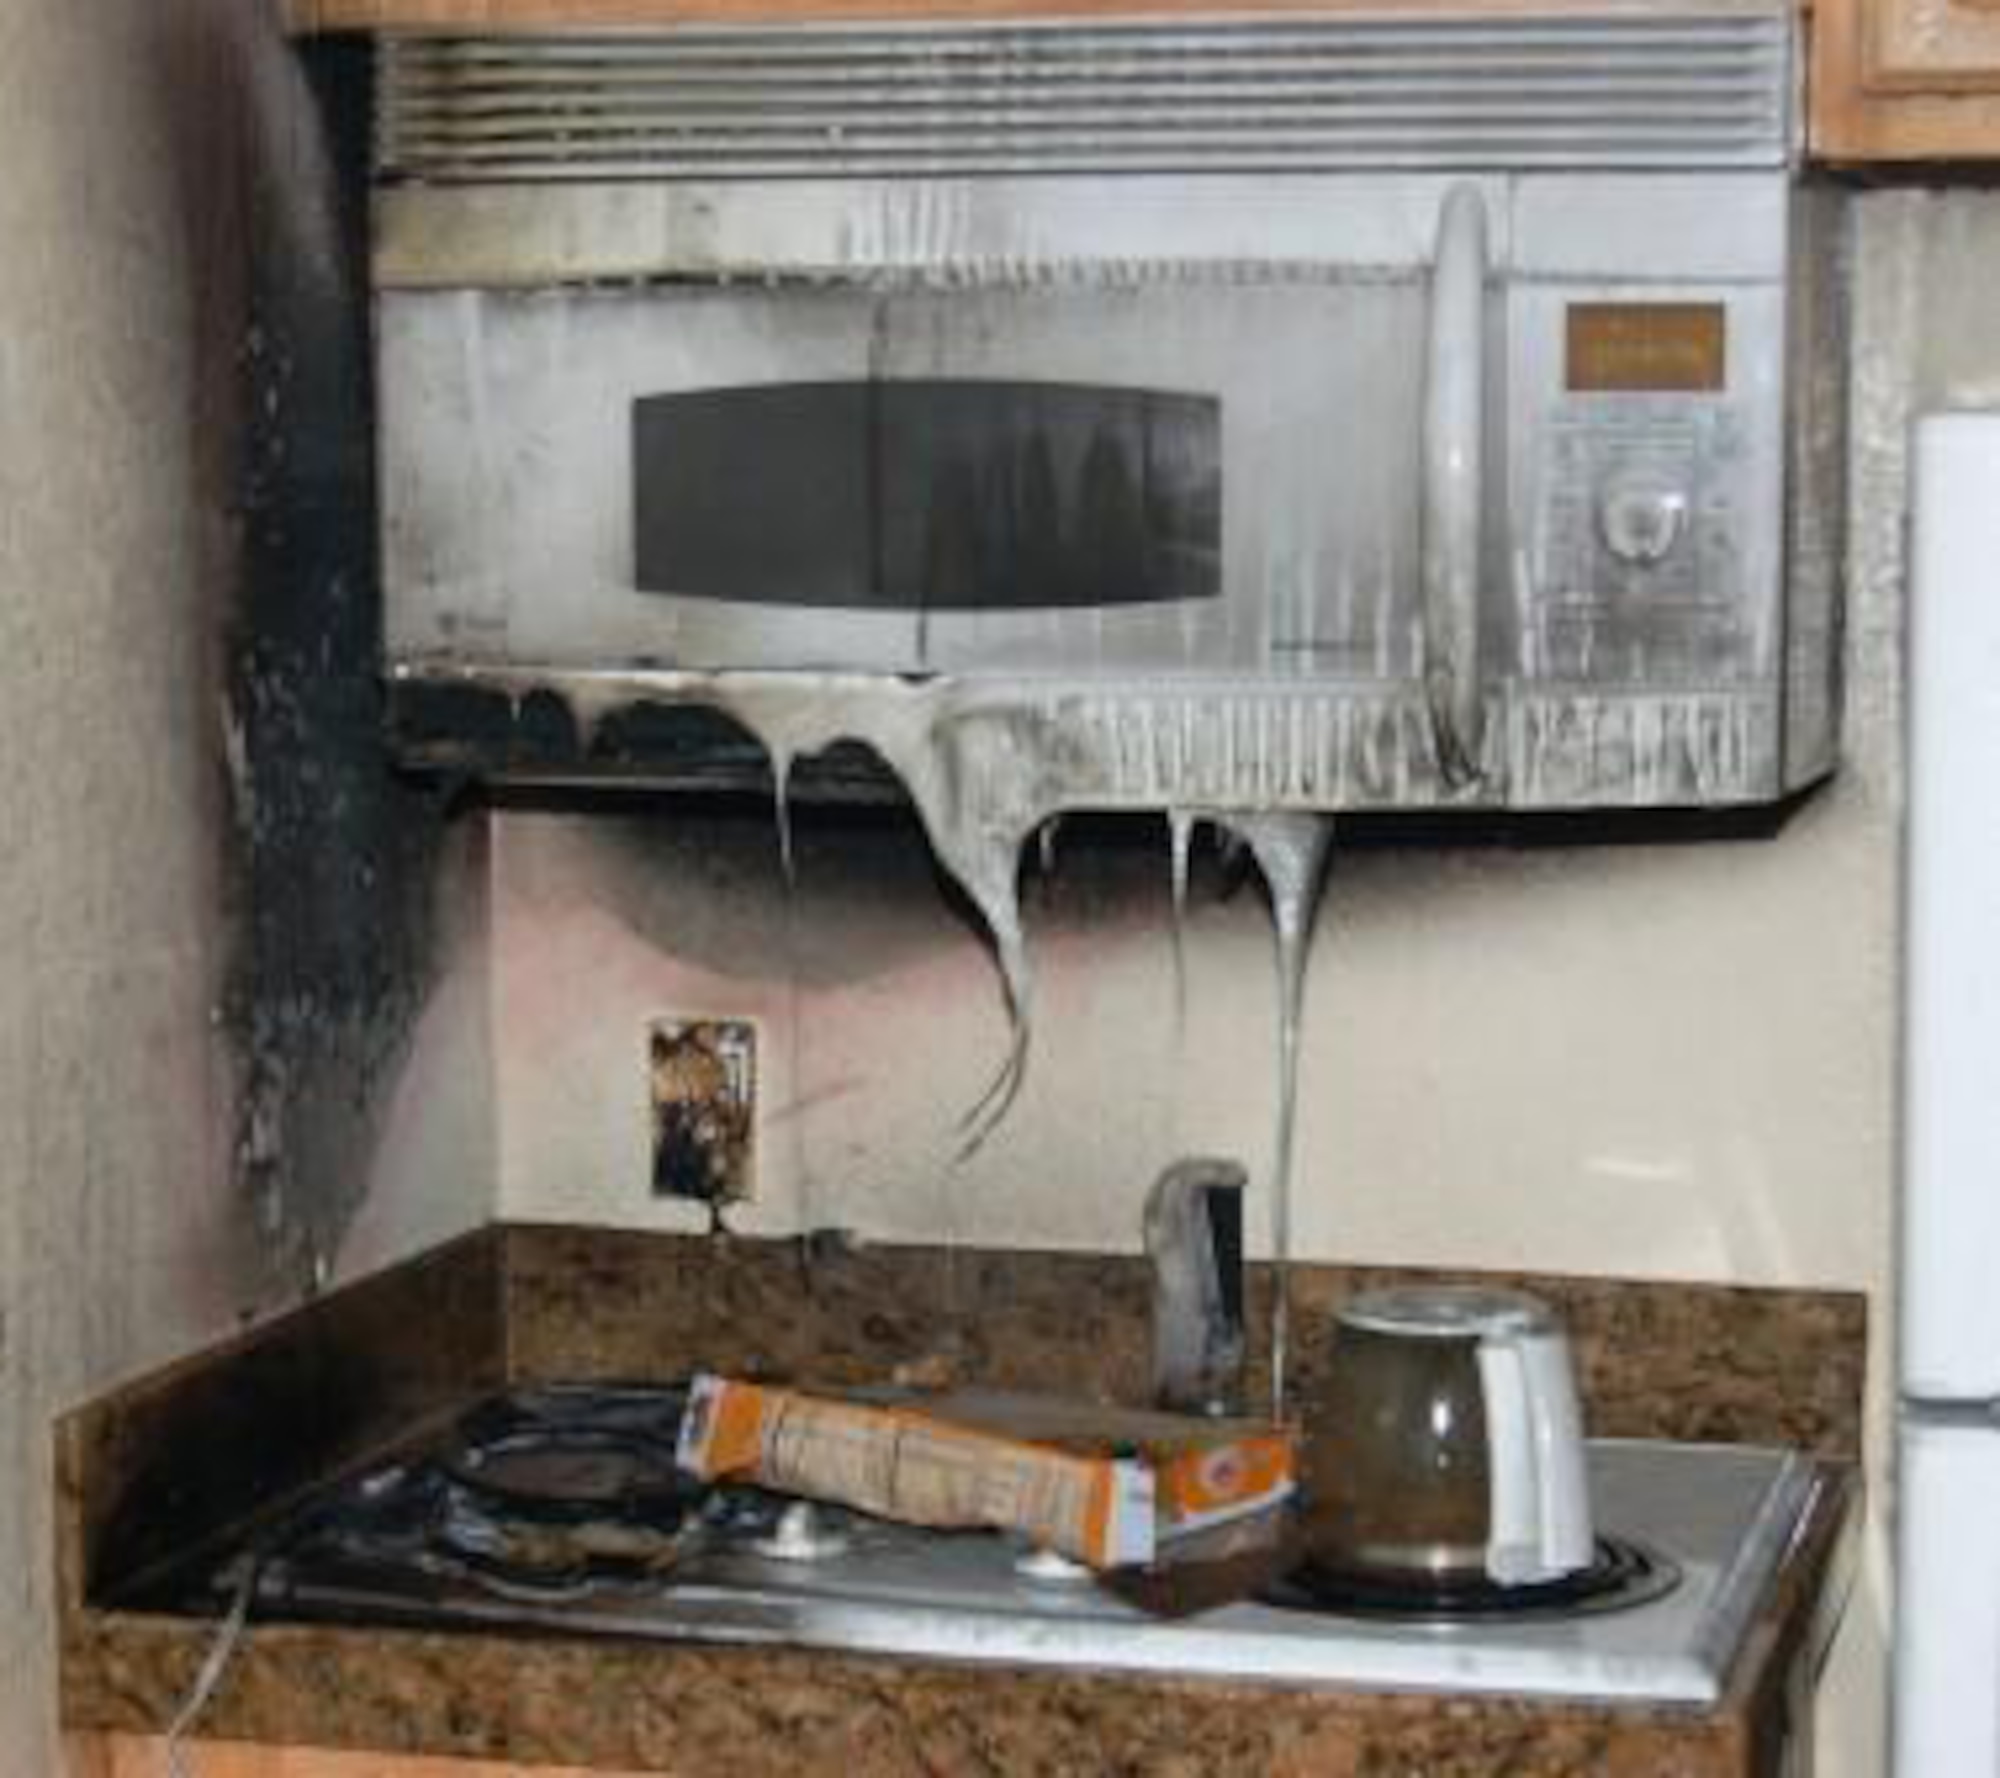 The aftermath of a cooking fire. (Courtesy photo)